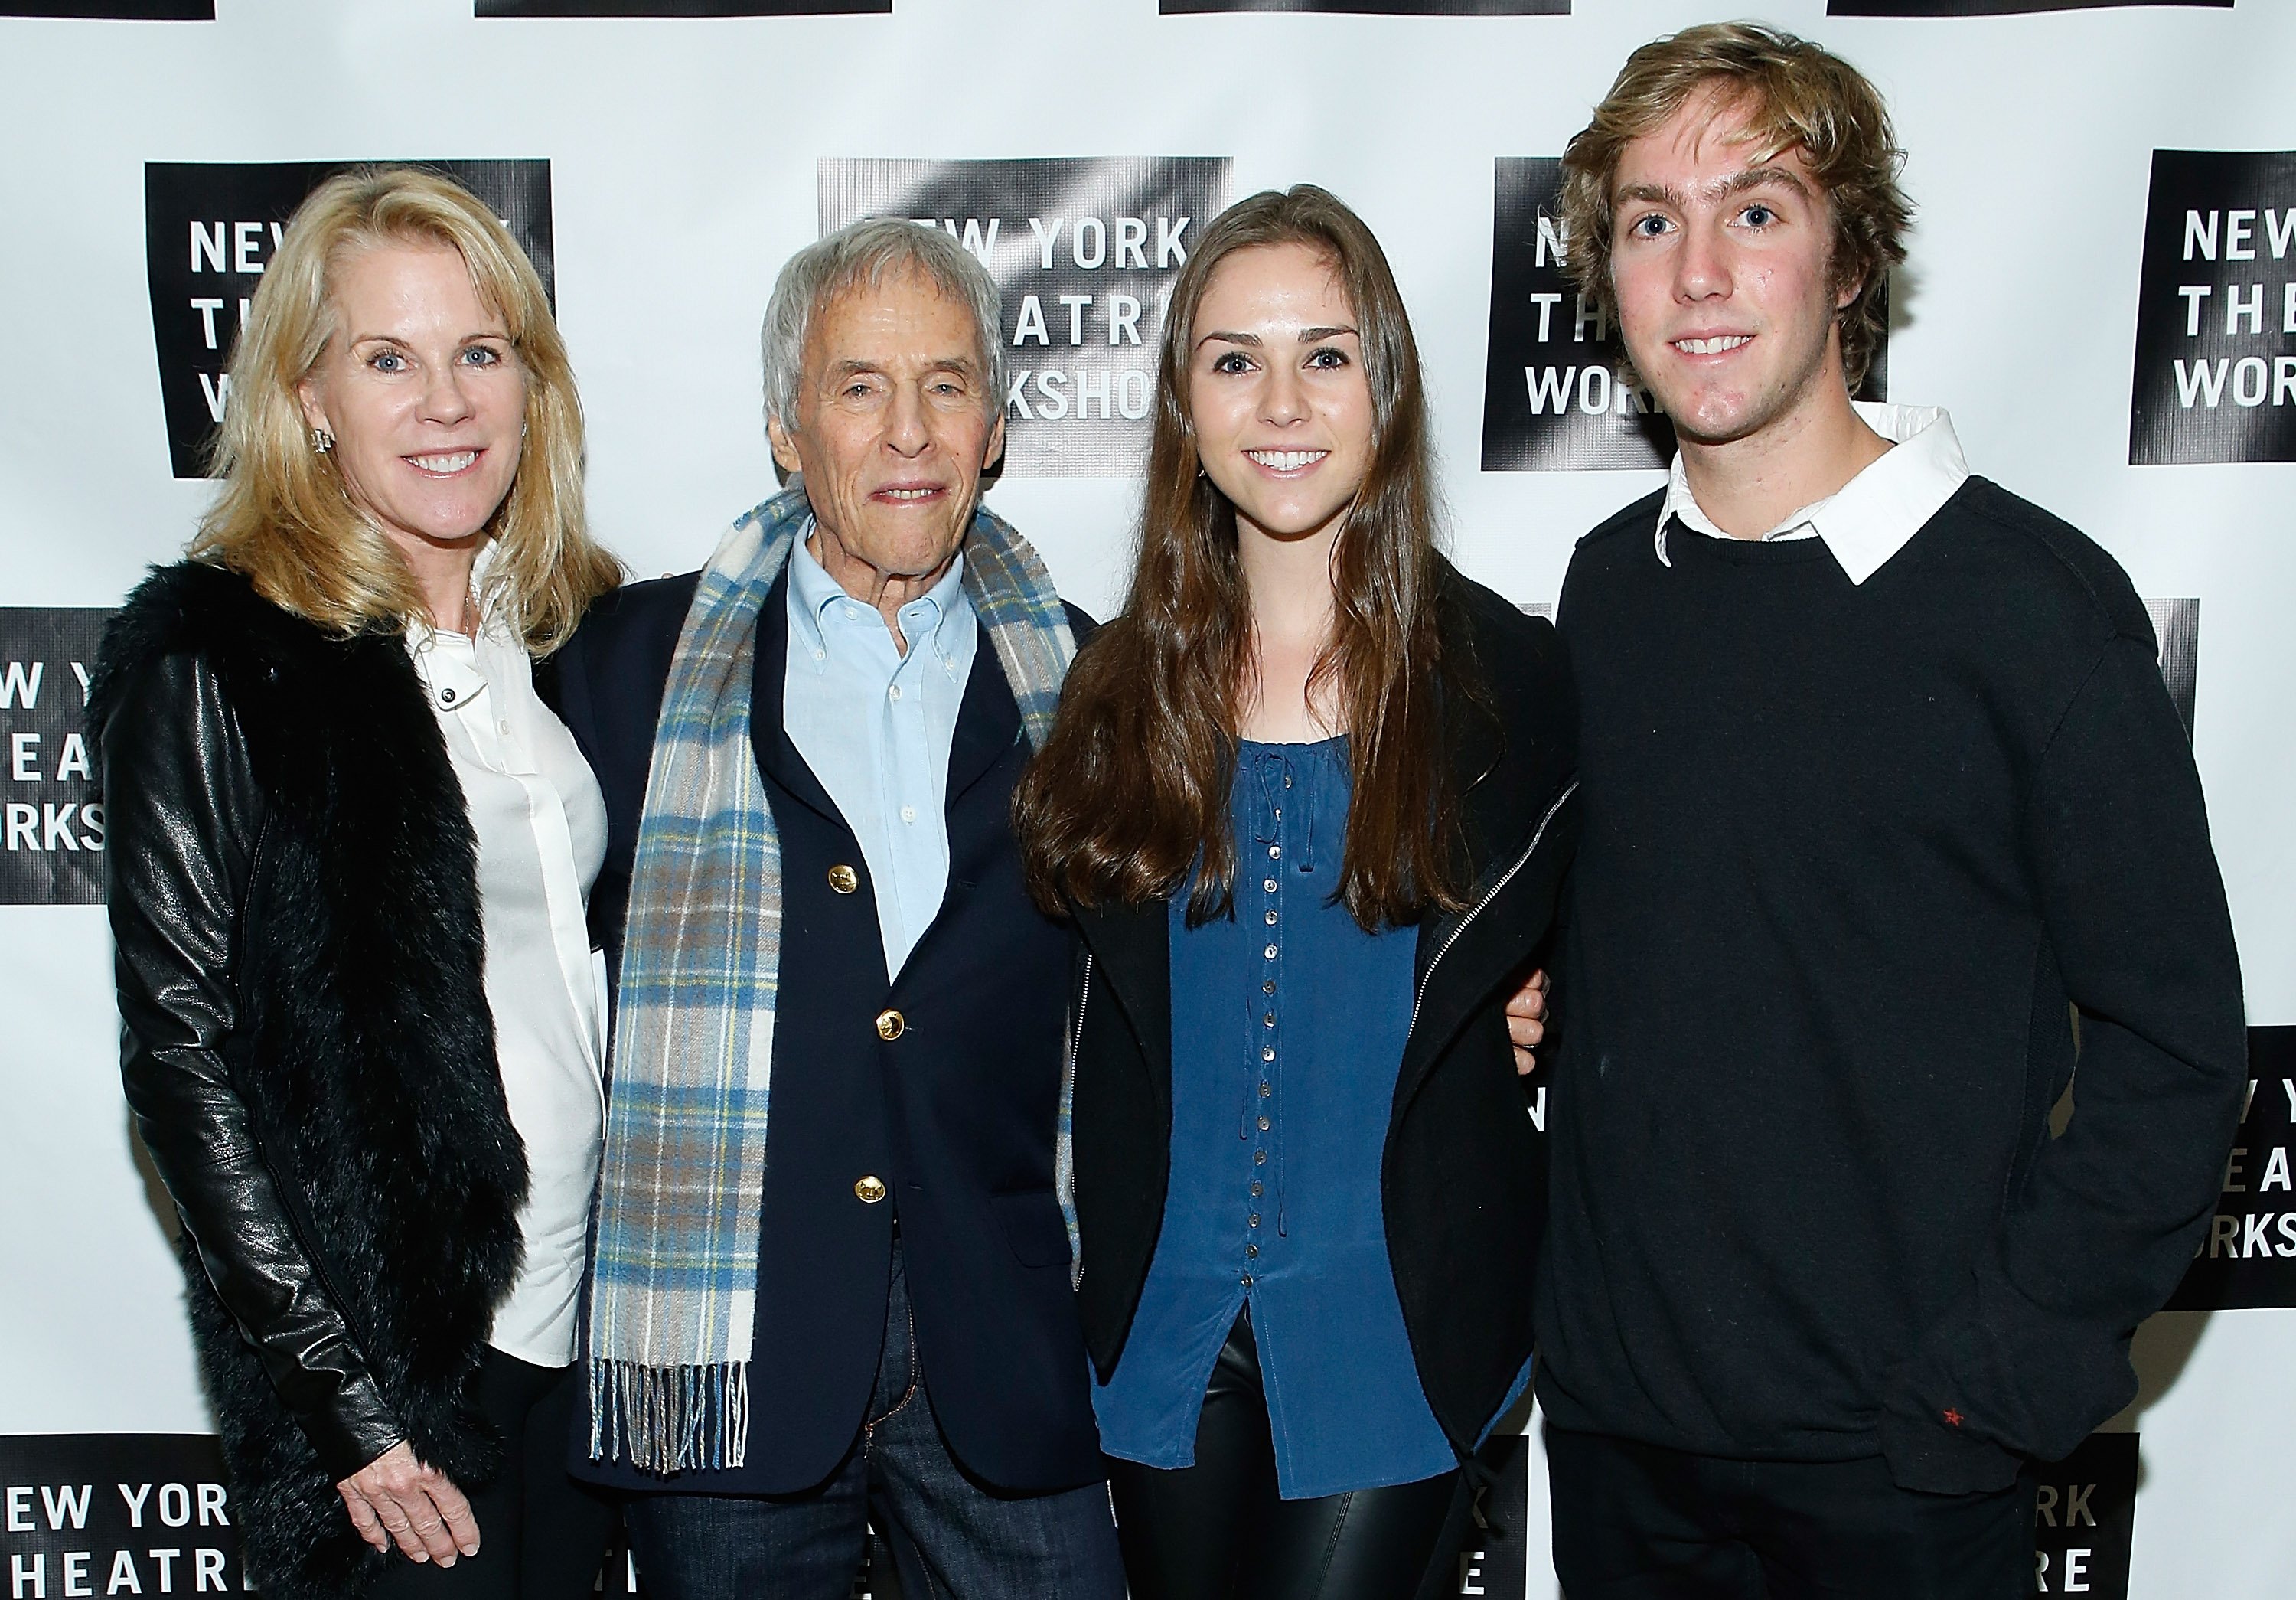 Jane Bacharach, Burt Bacharach, Raleigh Bacharach and Oliver Bacharach attend "What's It All About? Bacharach Reimagined" opening night at Phebe's, on December 5, 2013, in New York City. | Source: Getty Images